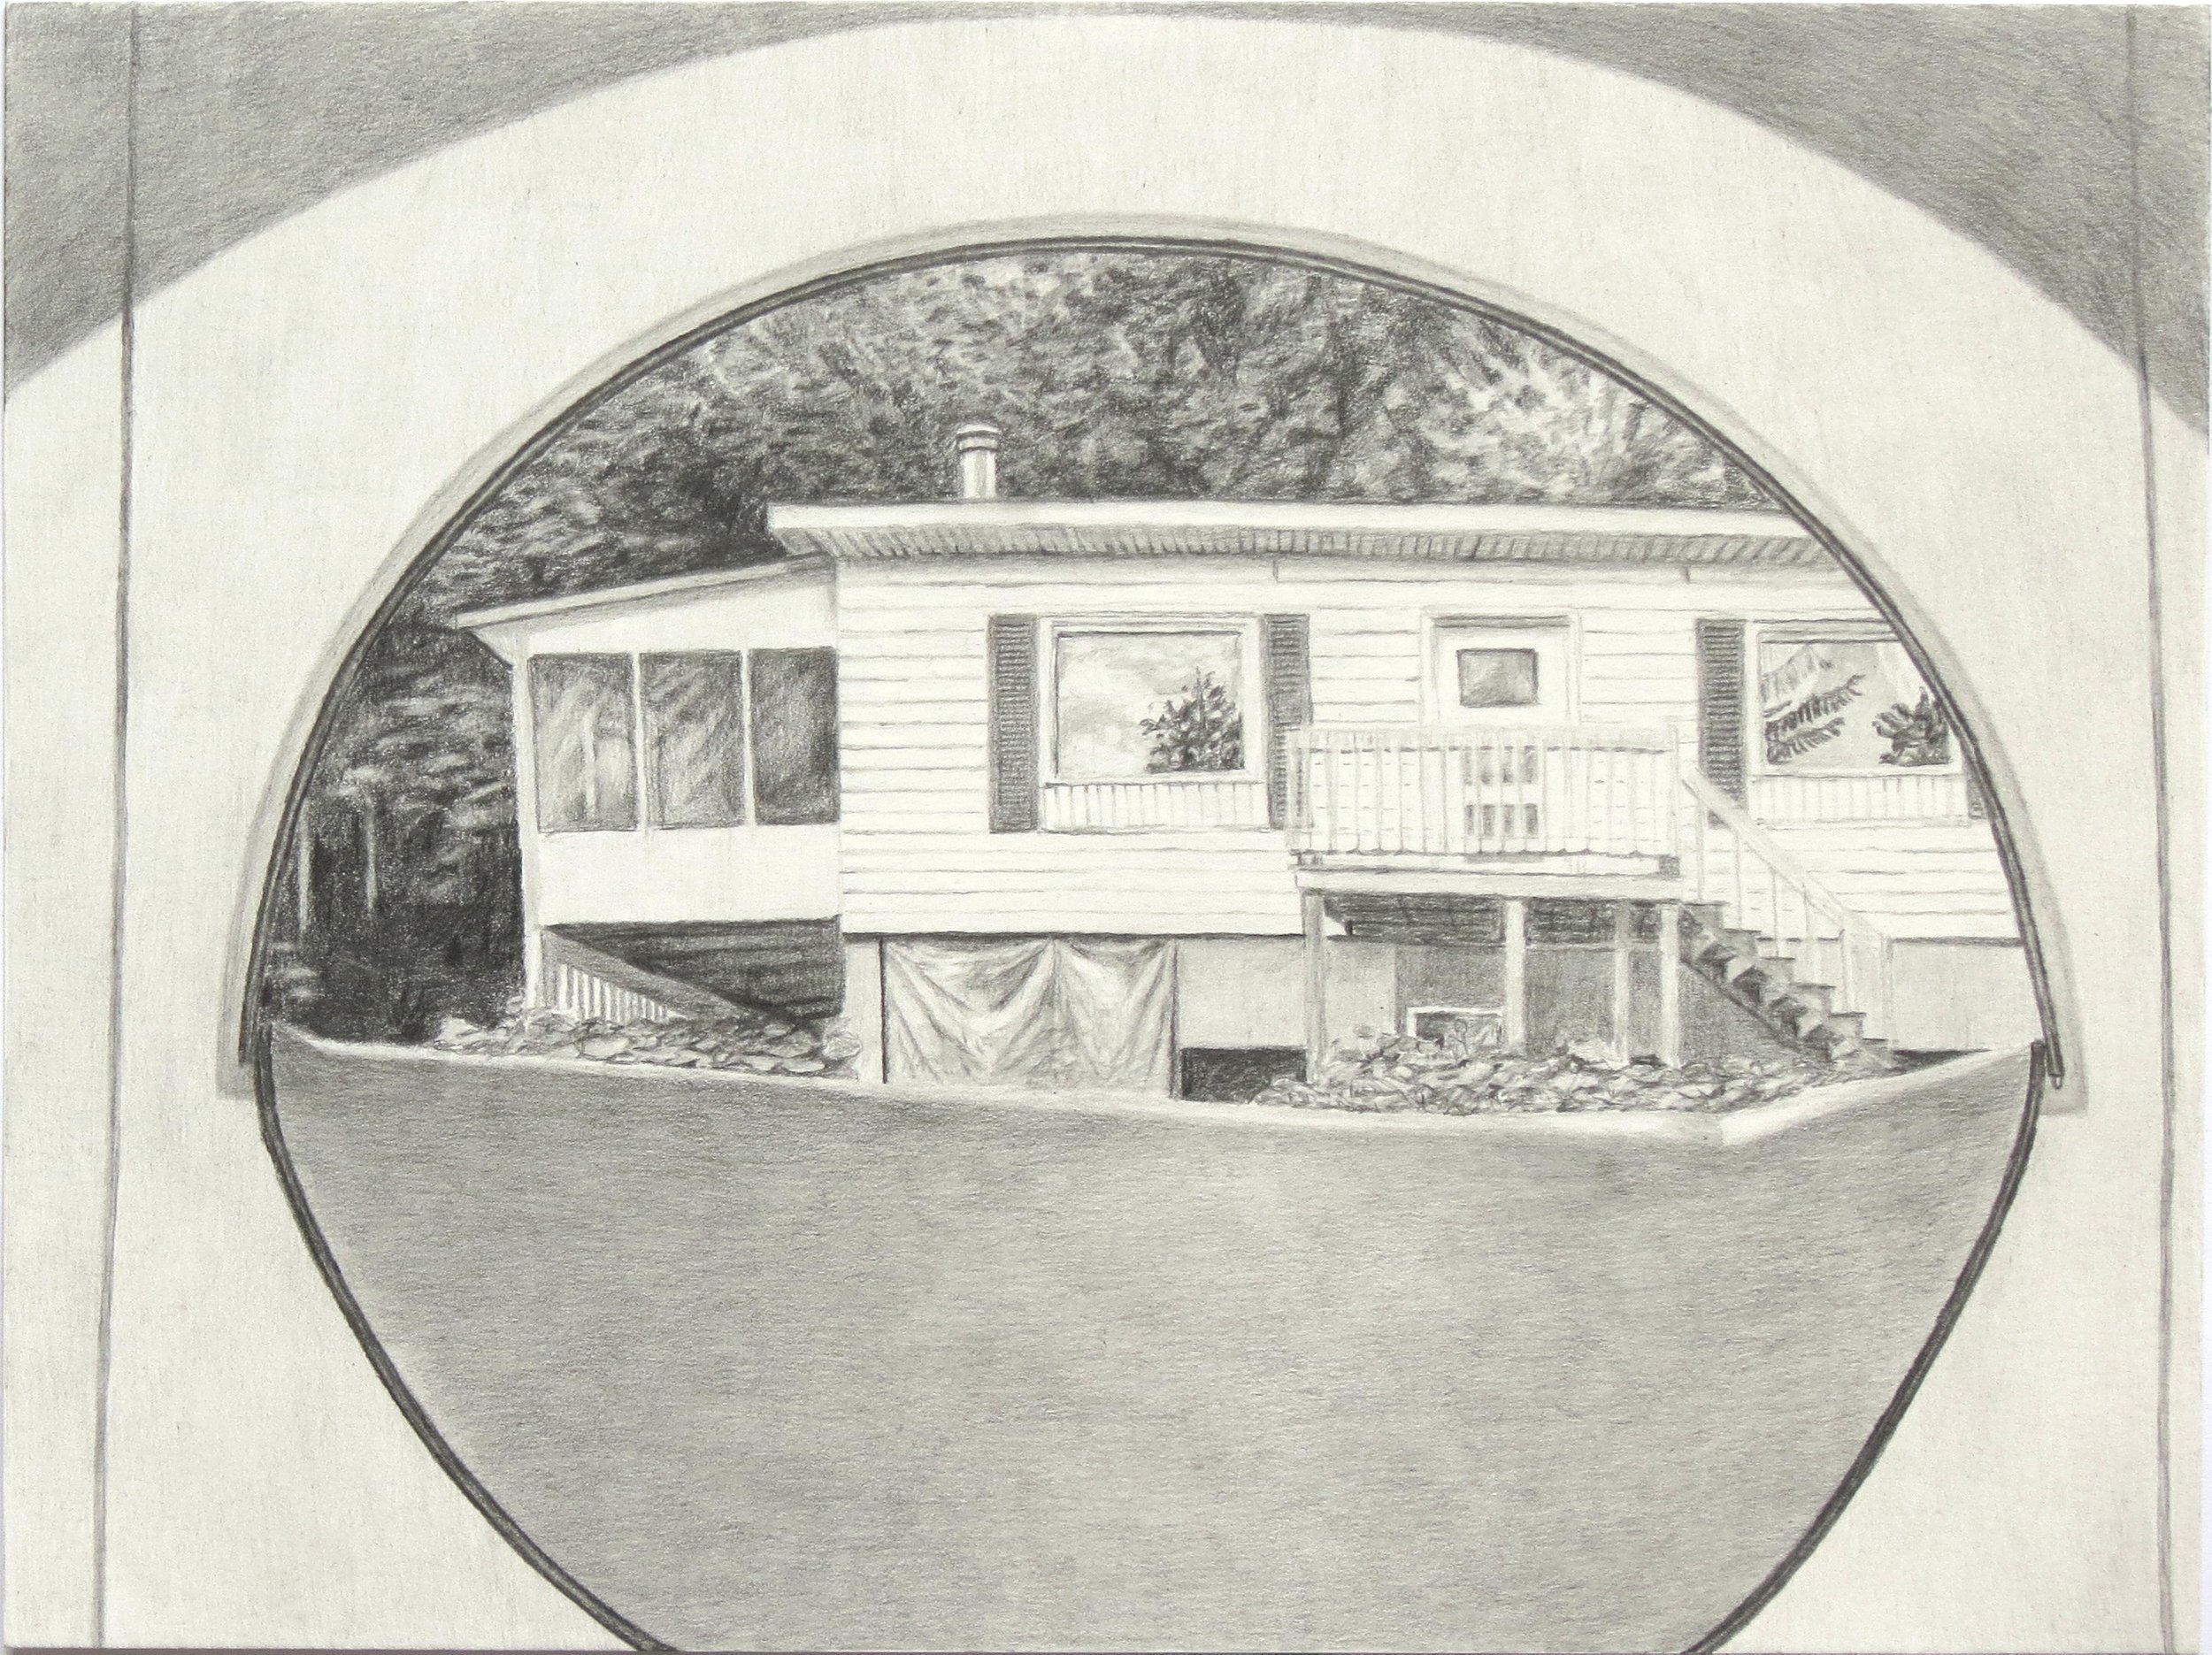   Impermanent Dwelling , 2021, Graphite on paper, 9 x 12 inches 